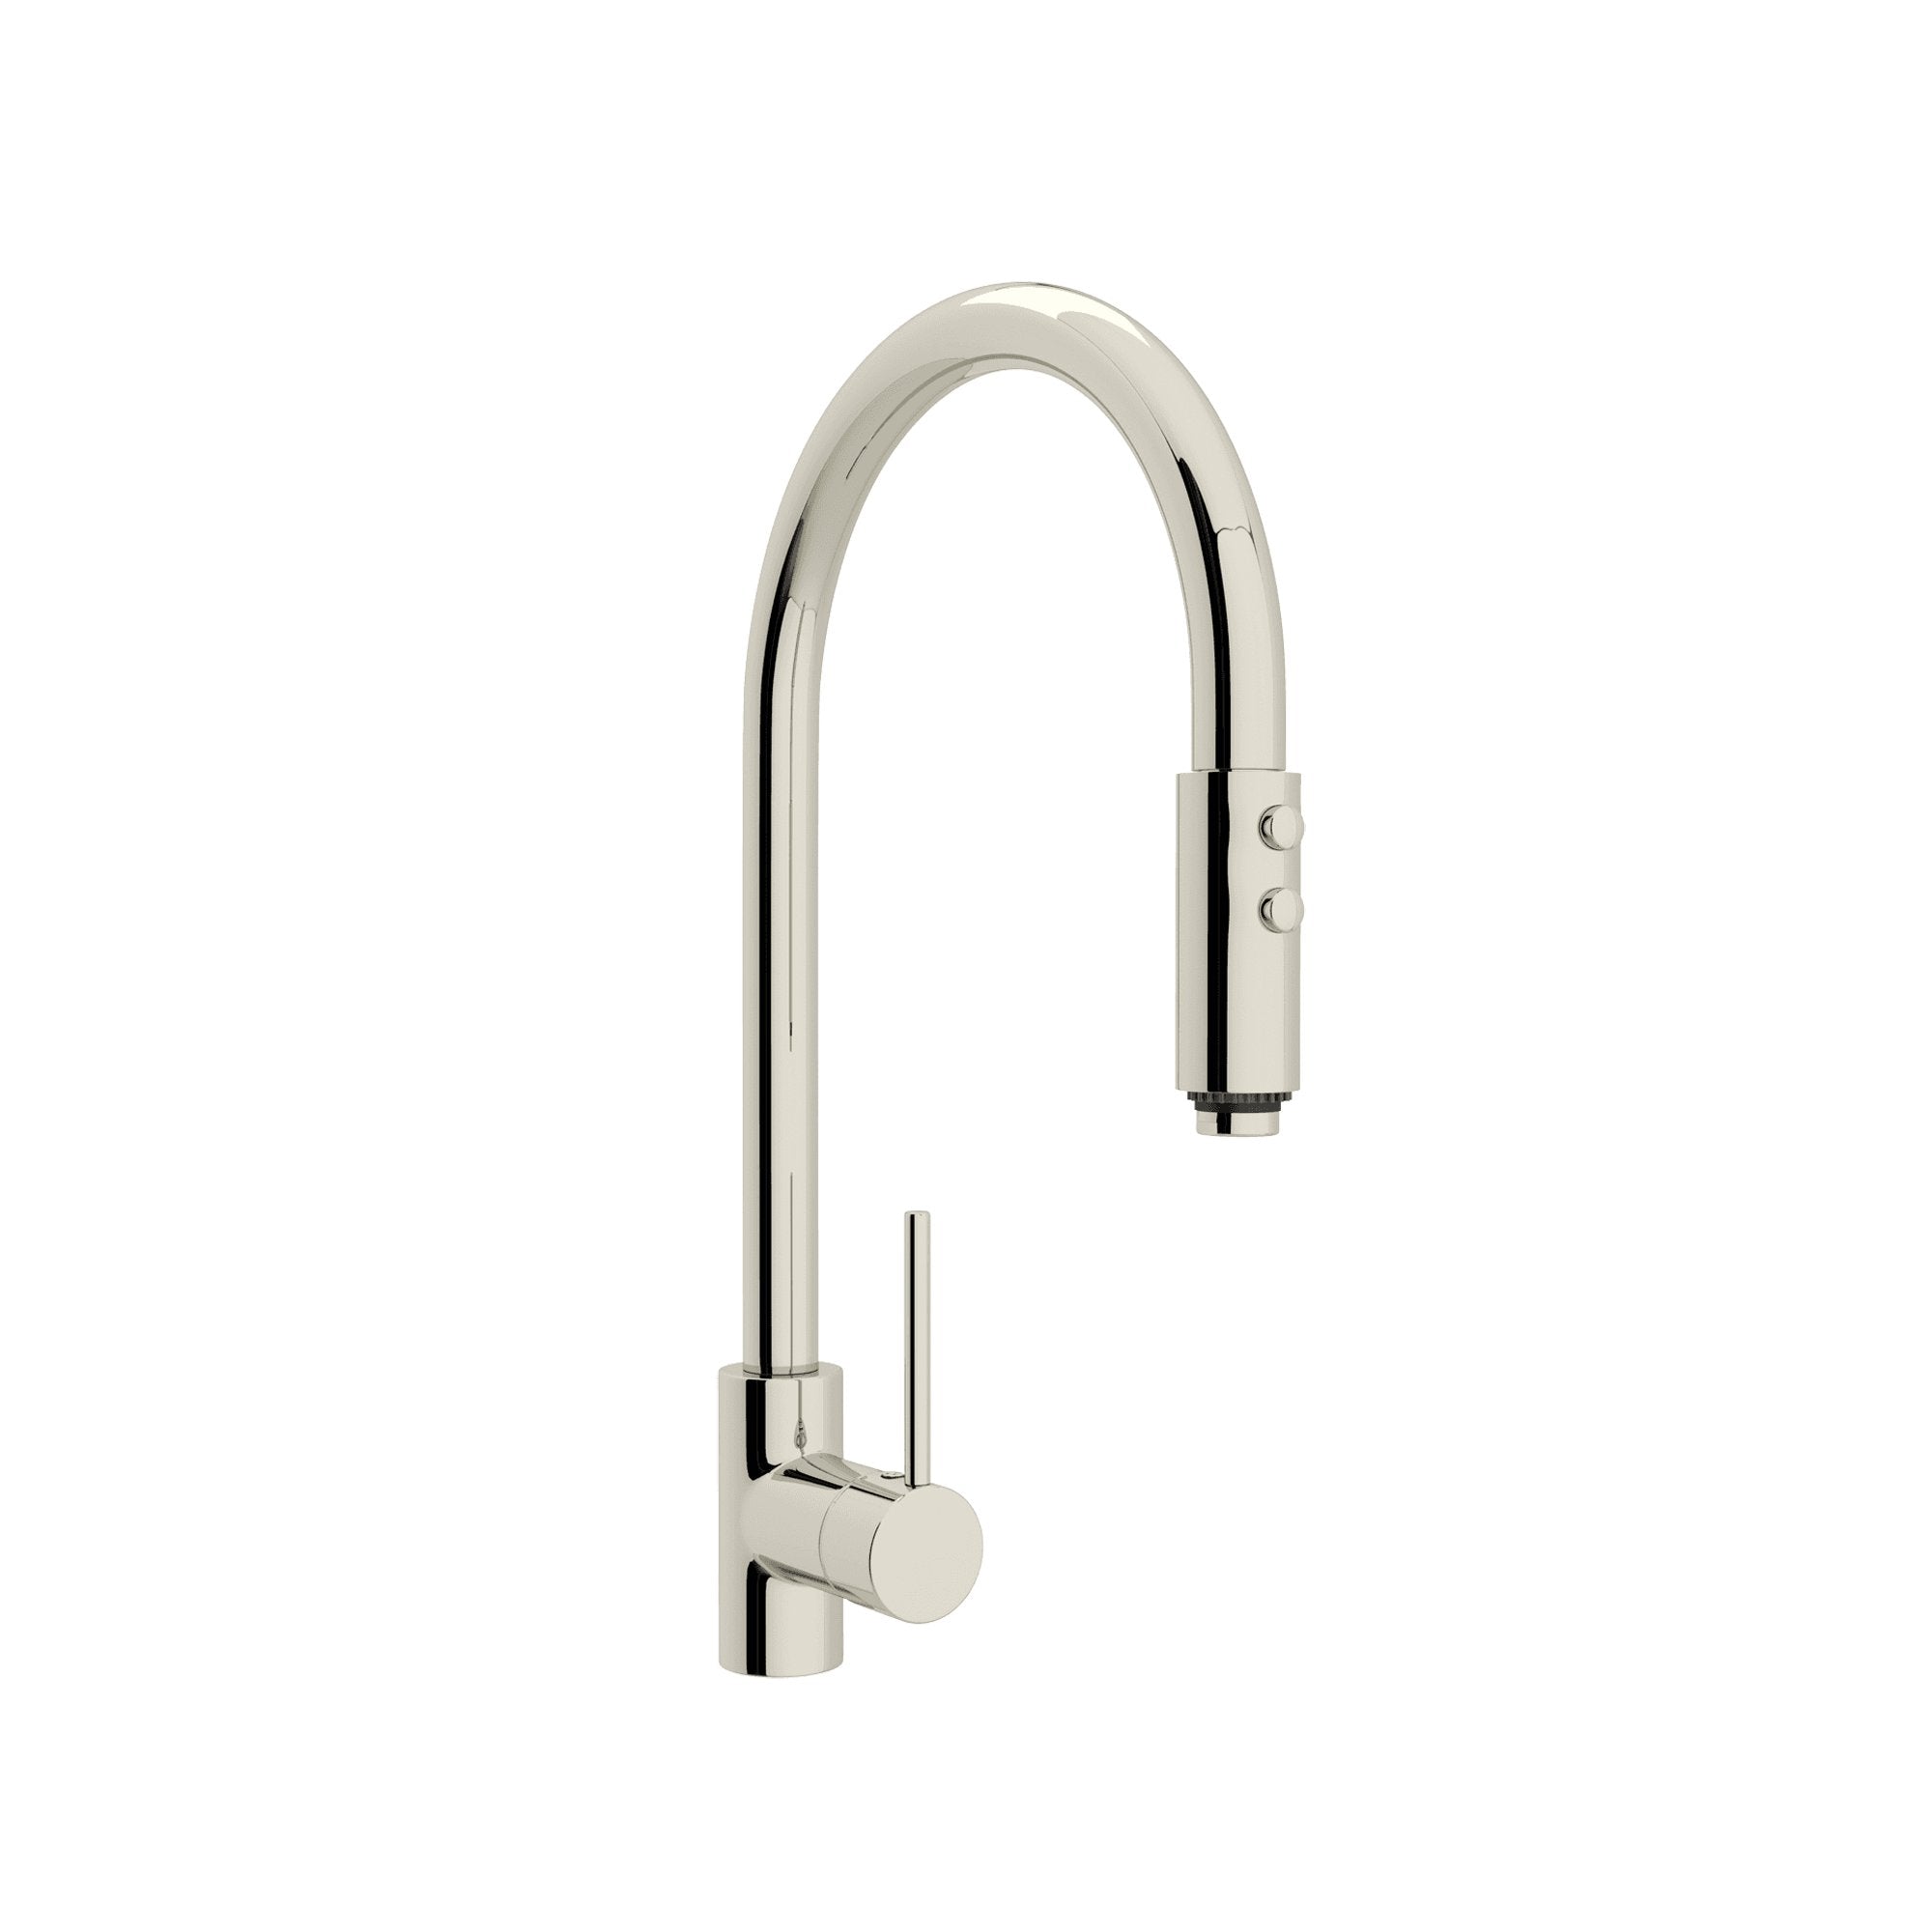 ROHL LS57 Pirellone Tall Pull-Down Kitchen Faucet